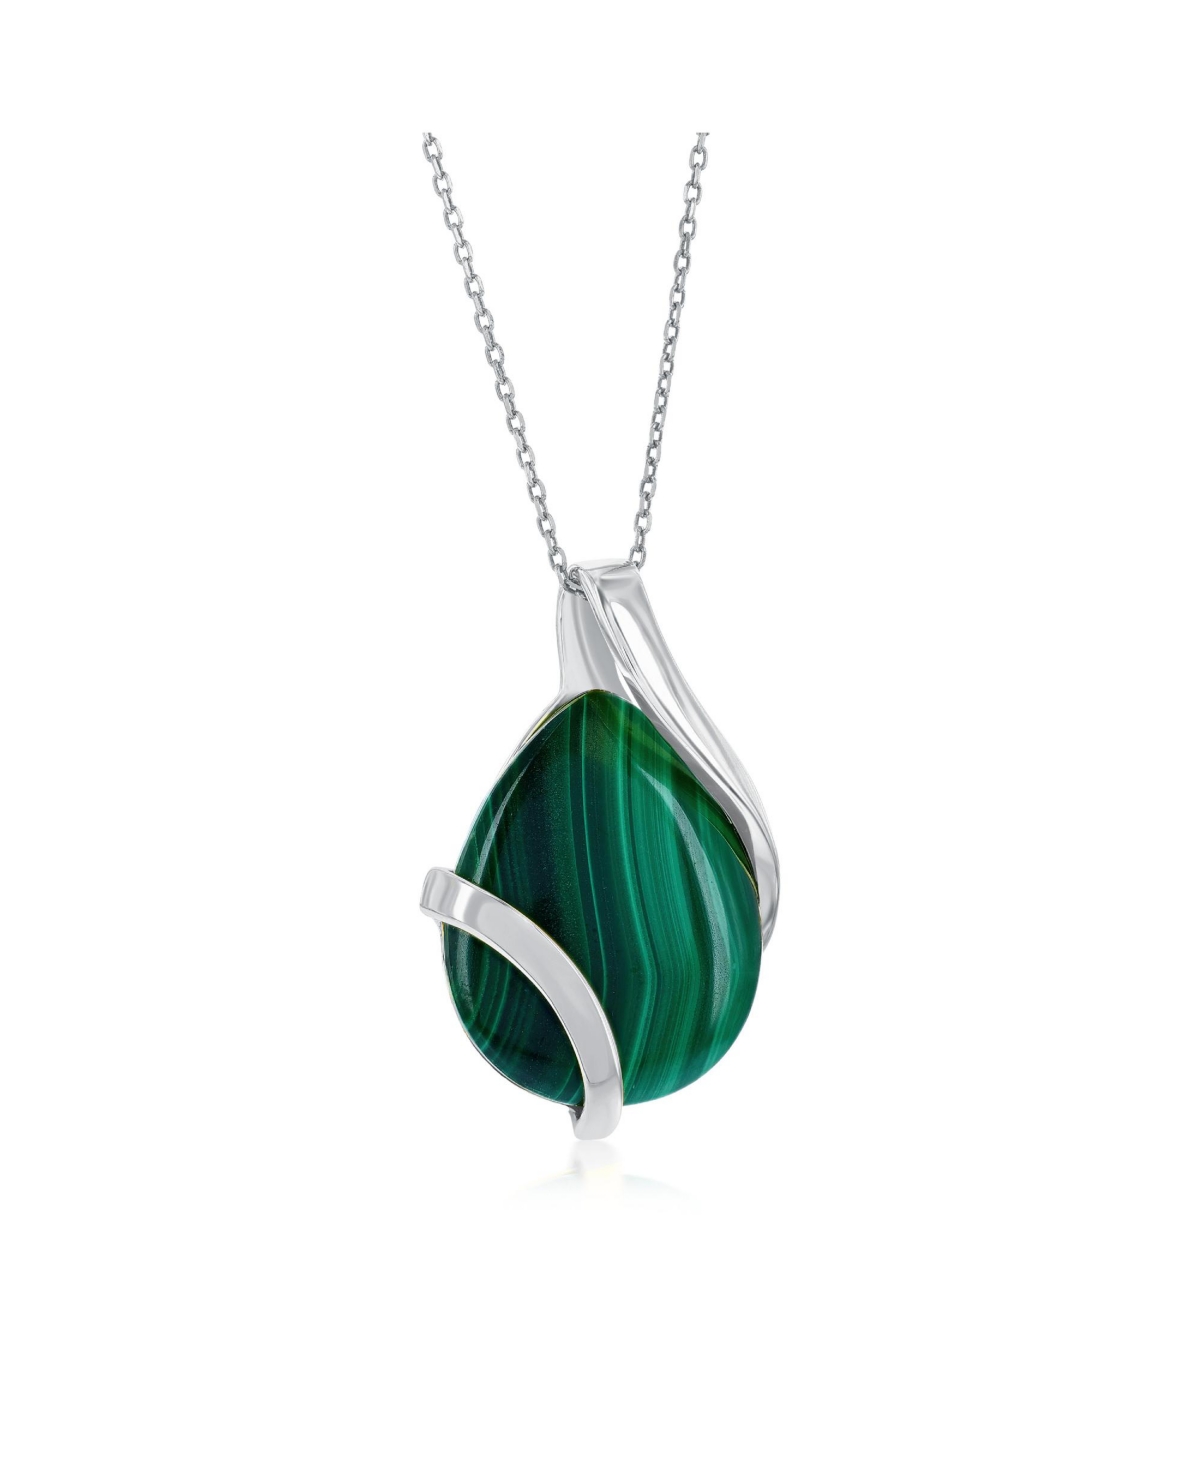 Sterling Silver or Gold Plated over Sterling Silver Large Pear-Shaped Malachite Pendant Necklace - Gold